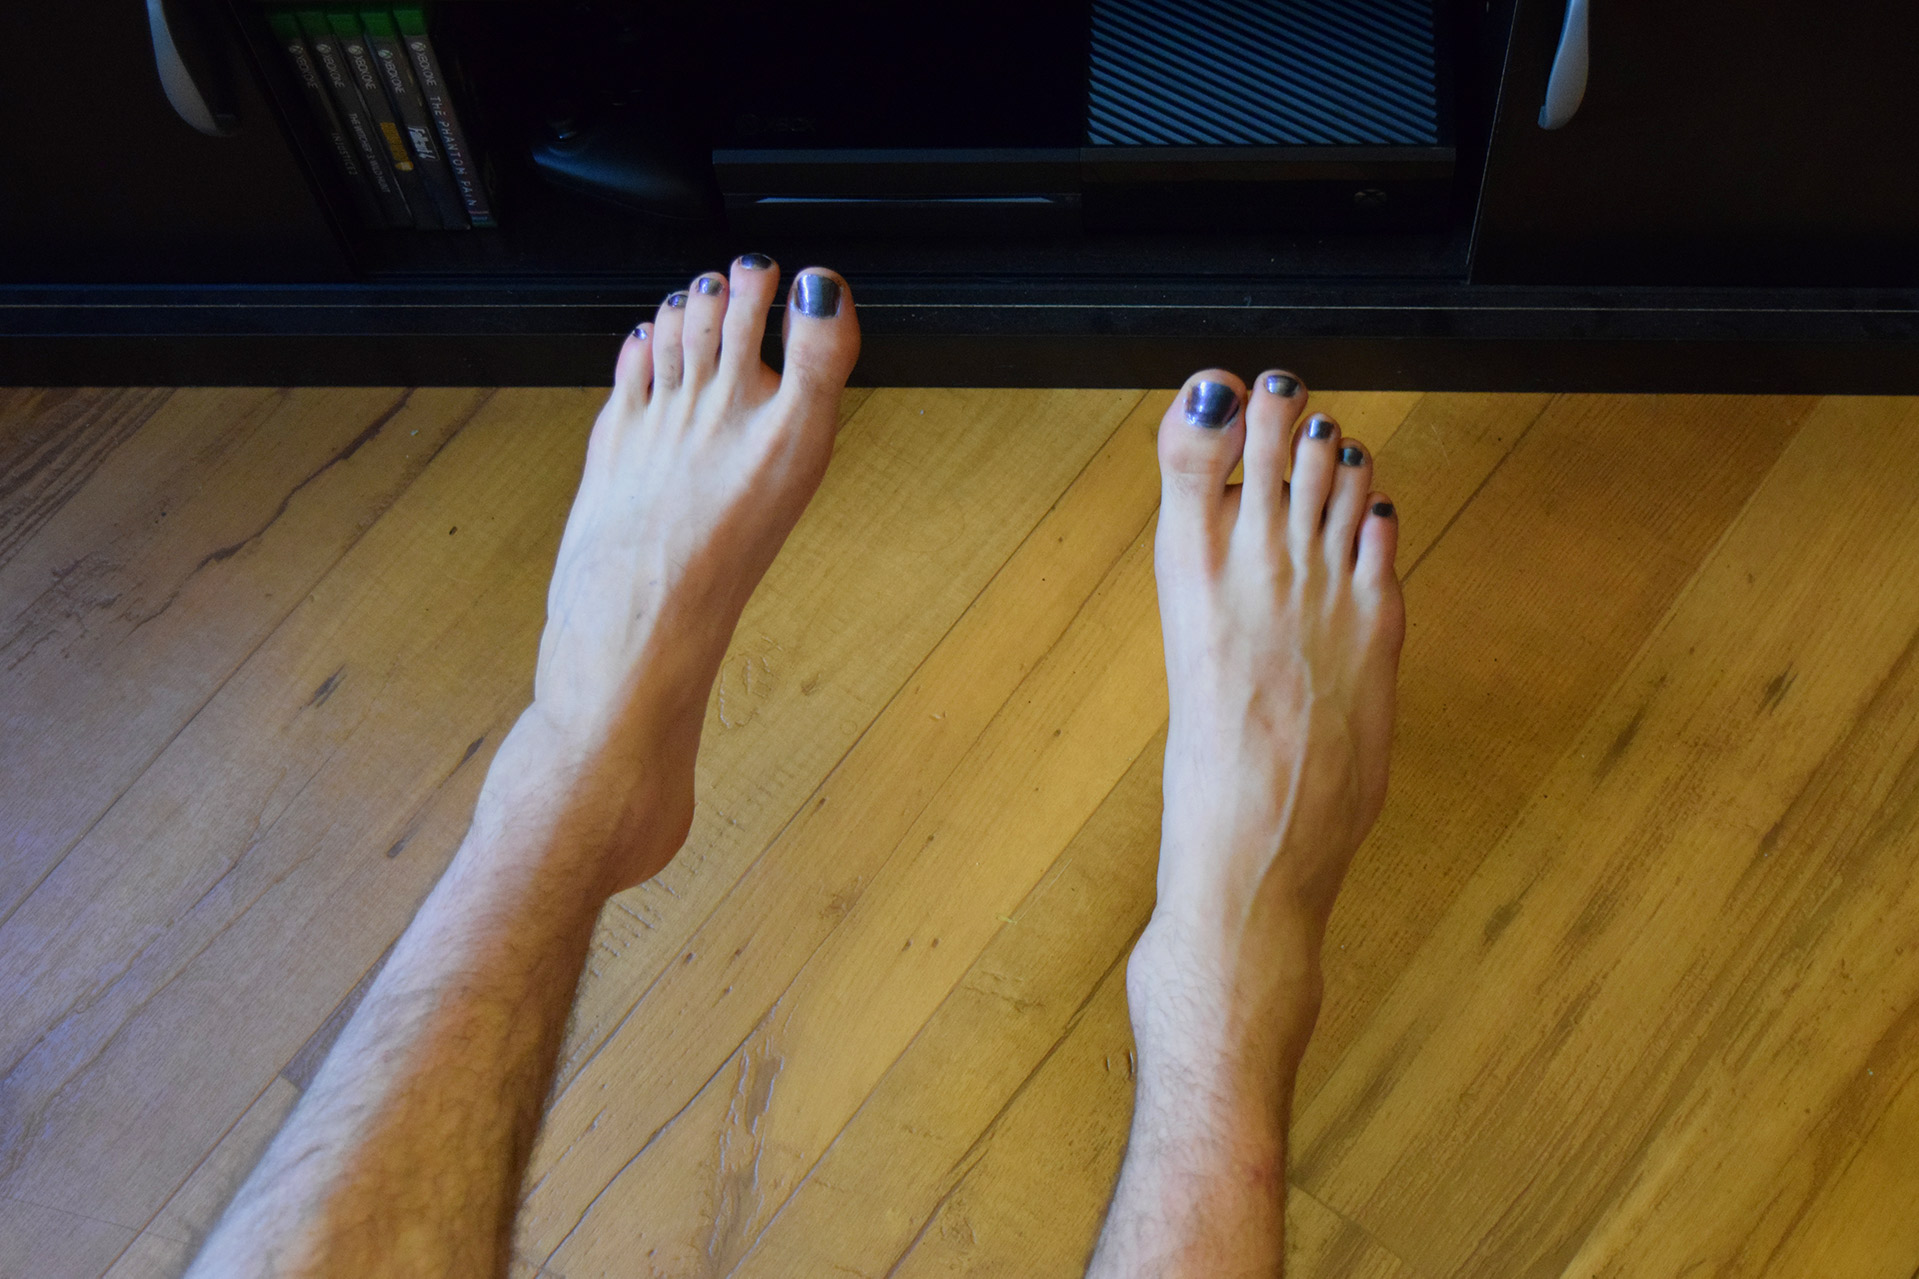  Cole flaunts his fabulous toenails, which flash green and purple in the light. Photo Credit: Katelyn Biddle